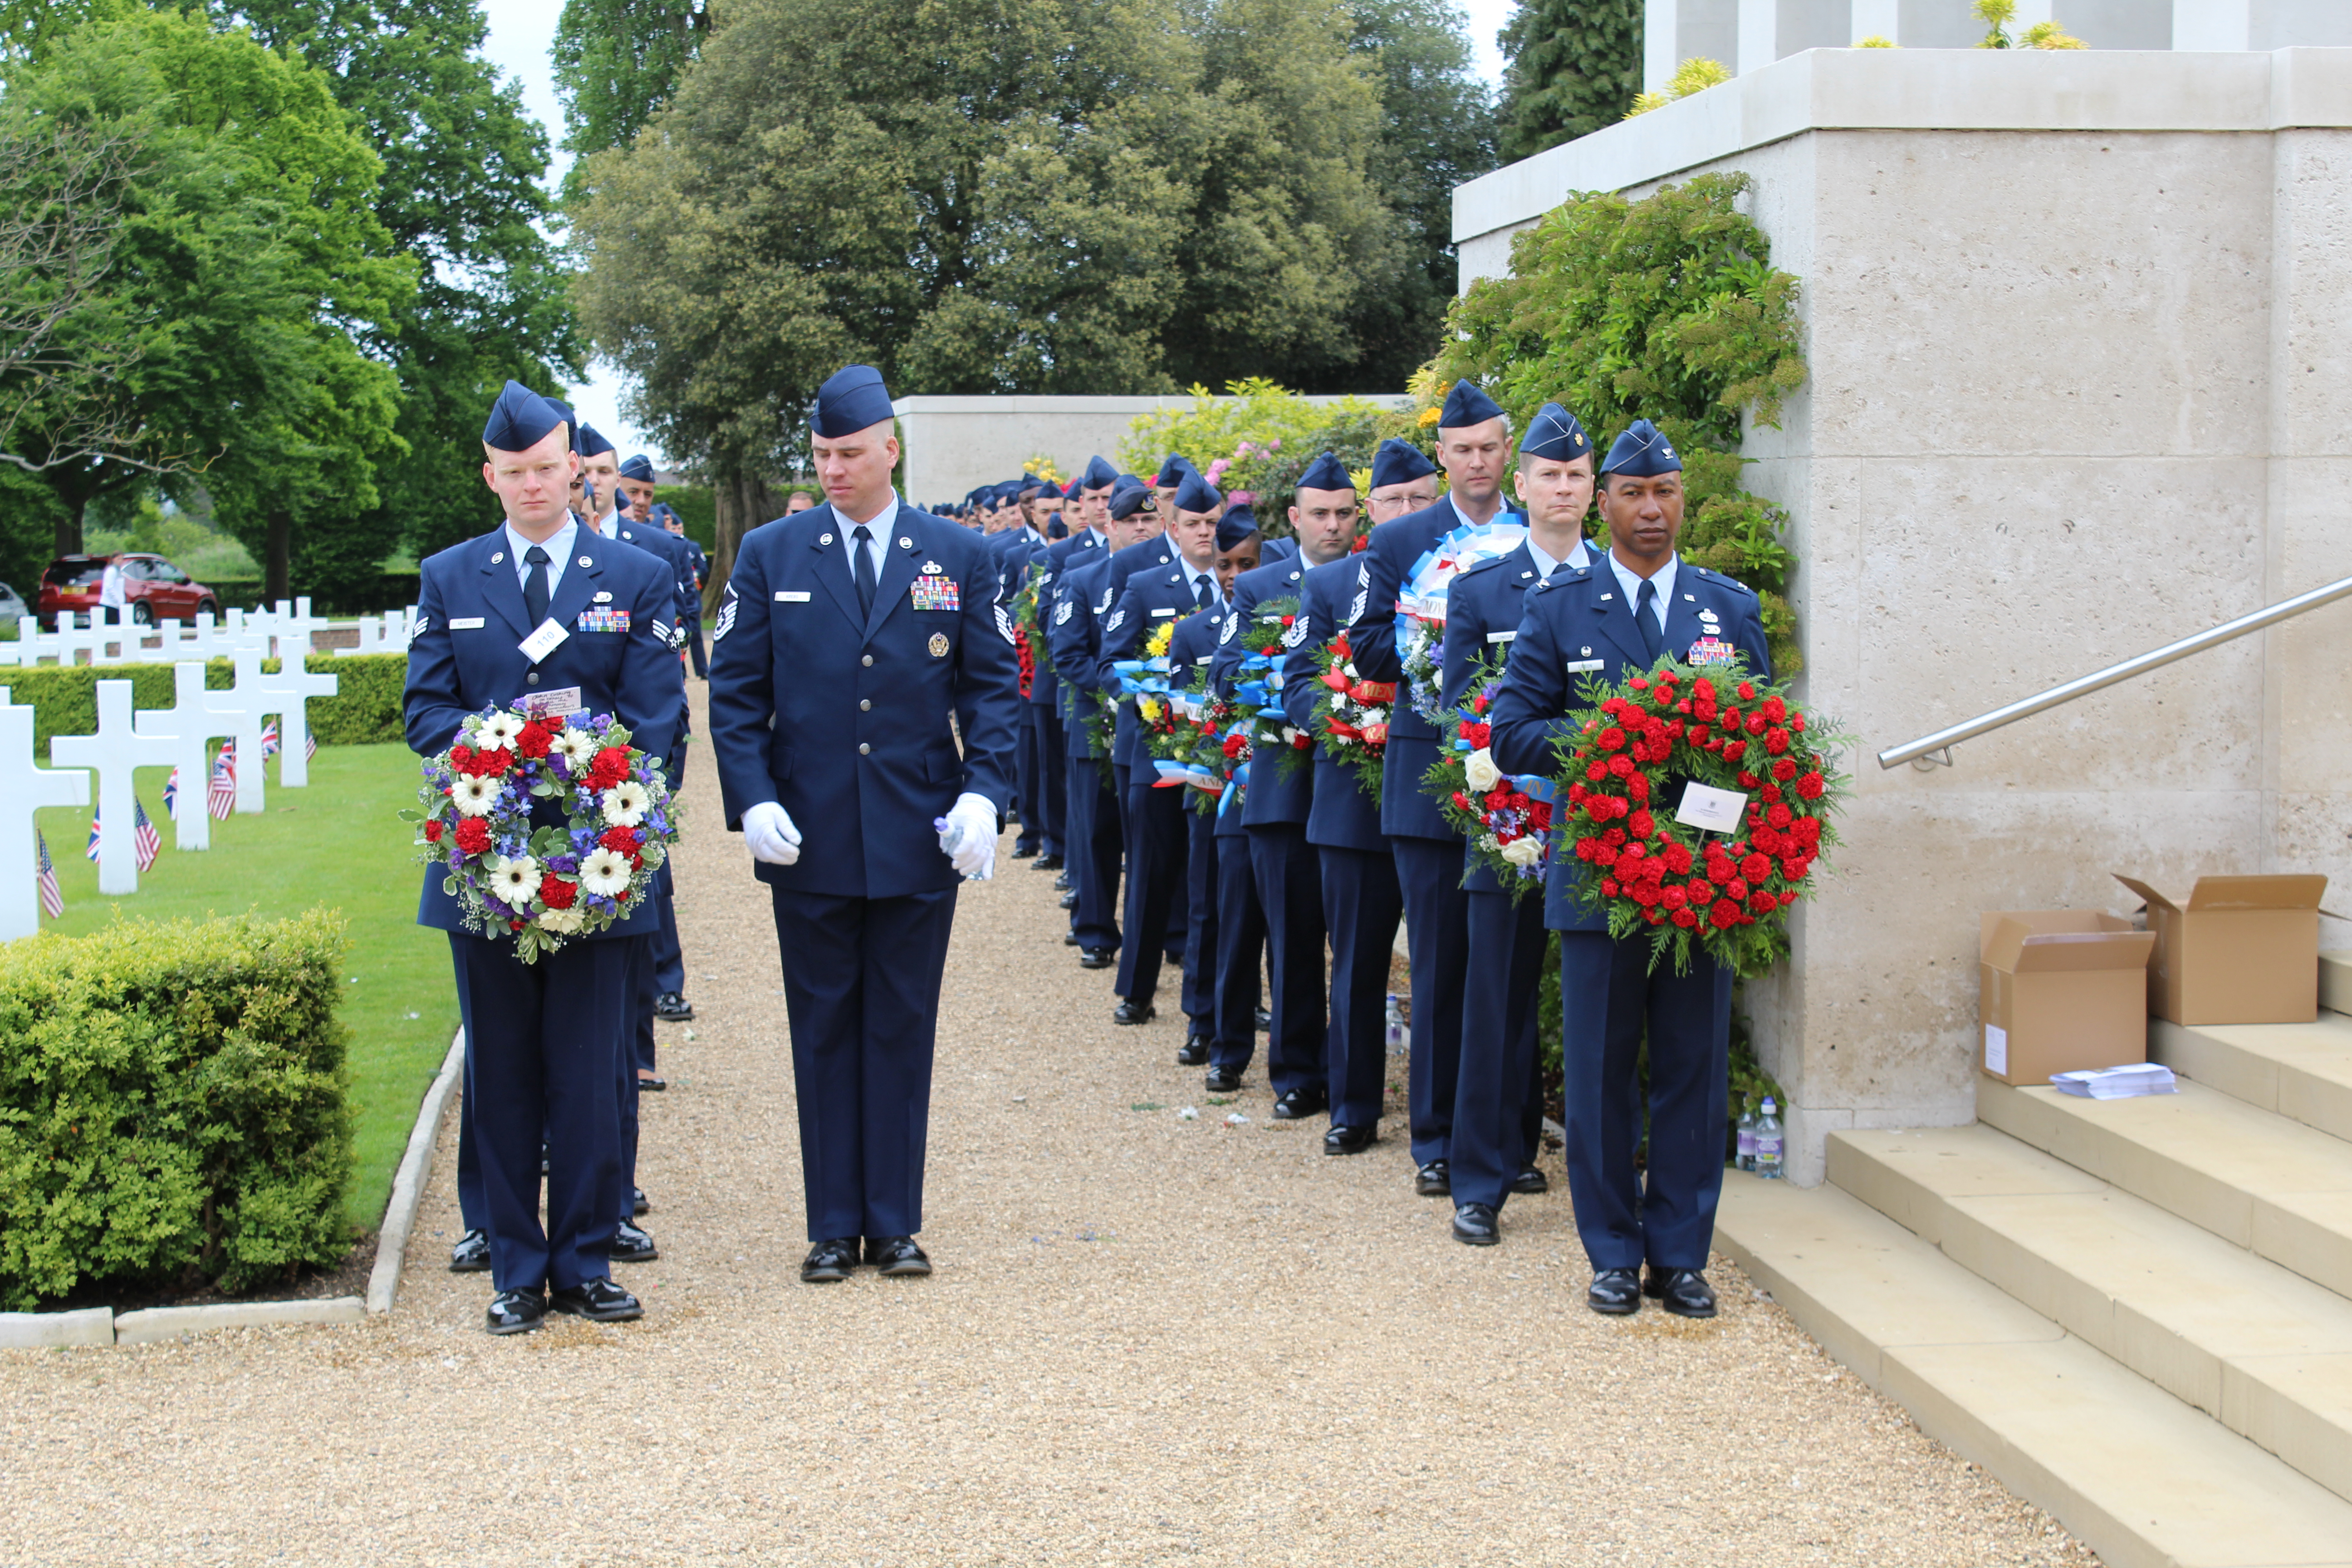 Members of the Air Force carry floral wreaths during the ceremony. 